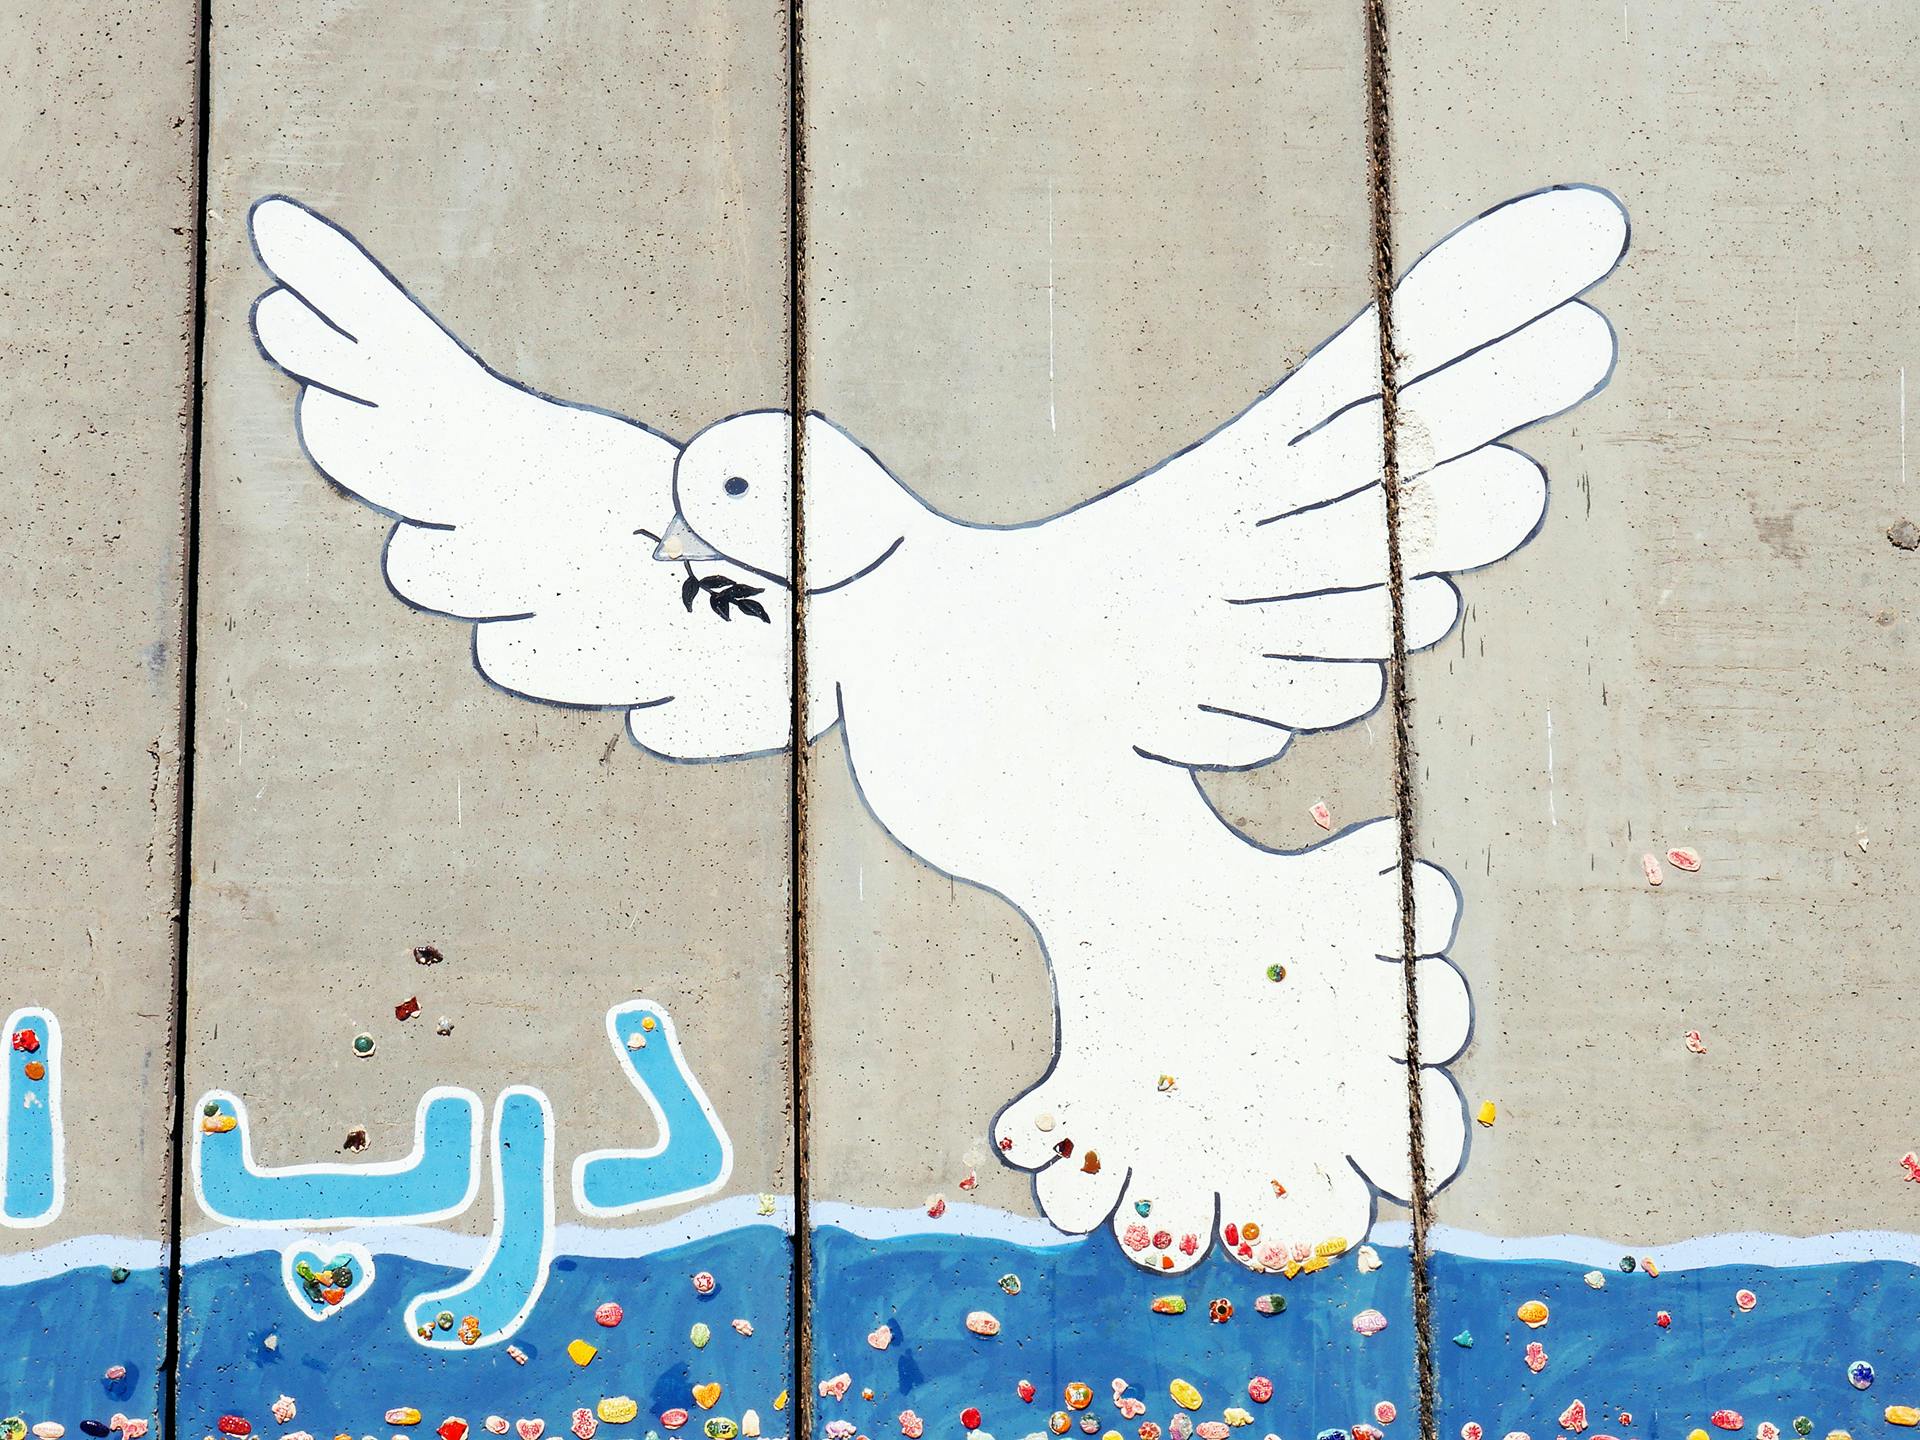 A mural painting showing a white peace dove